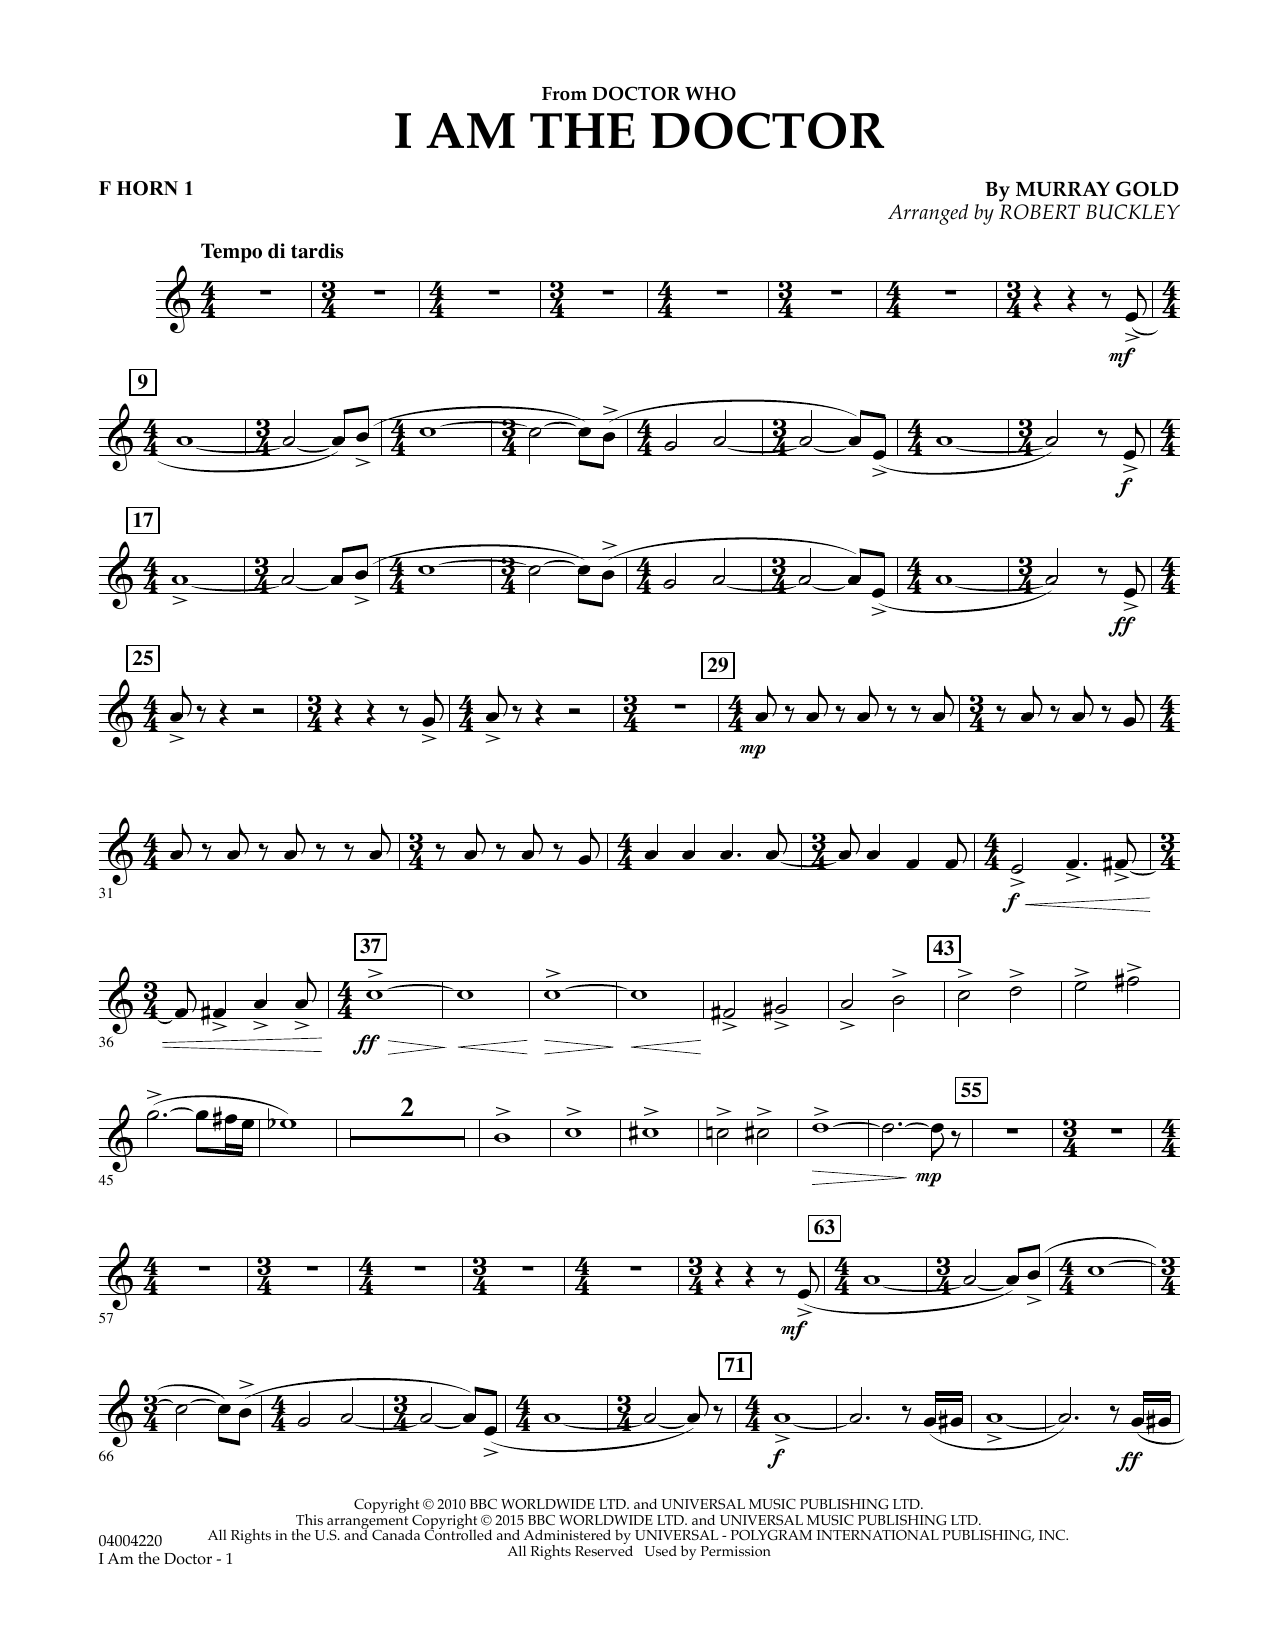 Robert Buckley I Am the Doctor (from Doctor Who) - F Horn 1 sheet music notes and chords. Download Printable PDF.